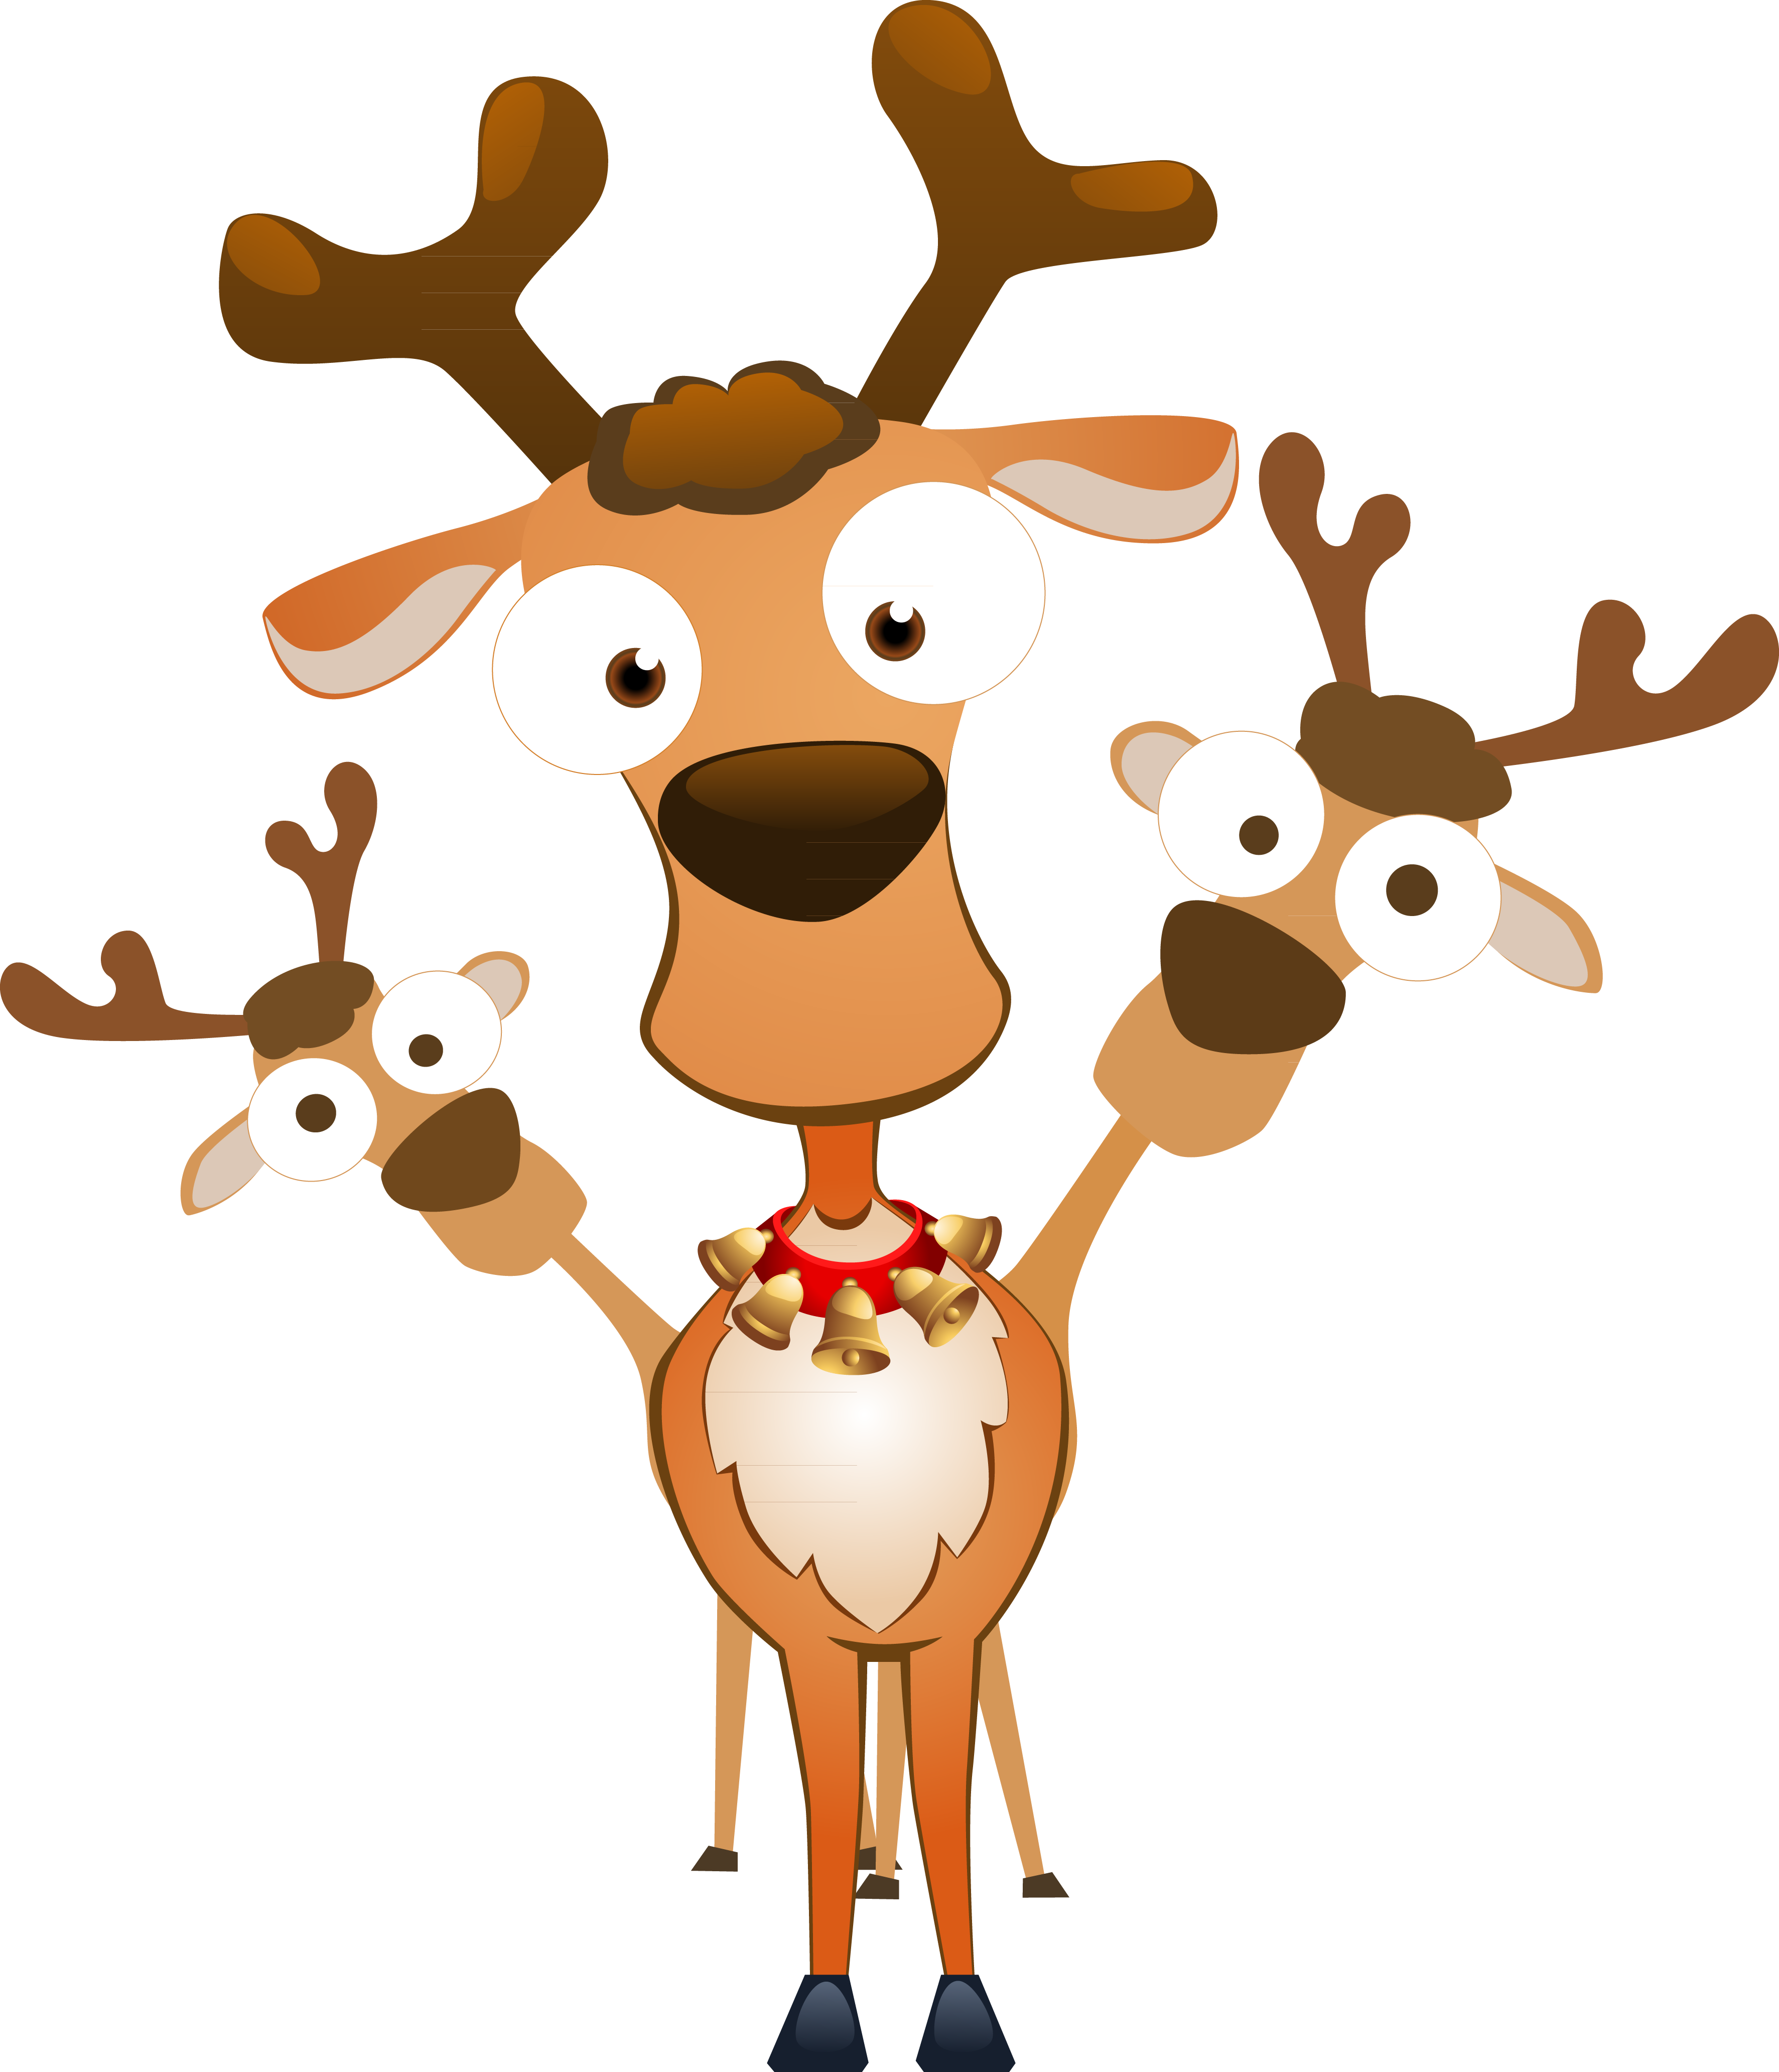 Claus Rudolph Reindeer Santa Christmas Download HQ PNG Clipart